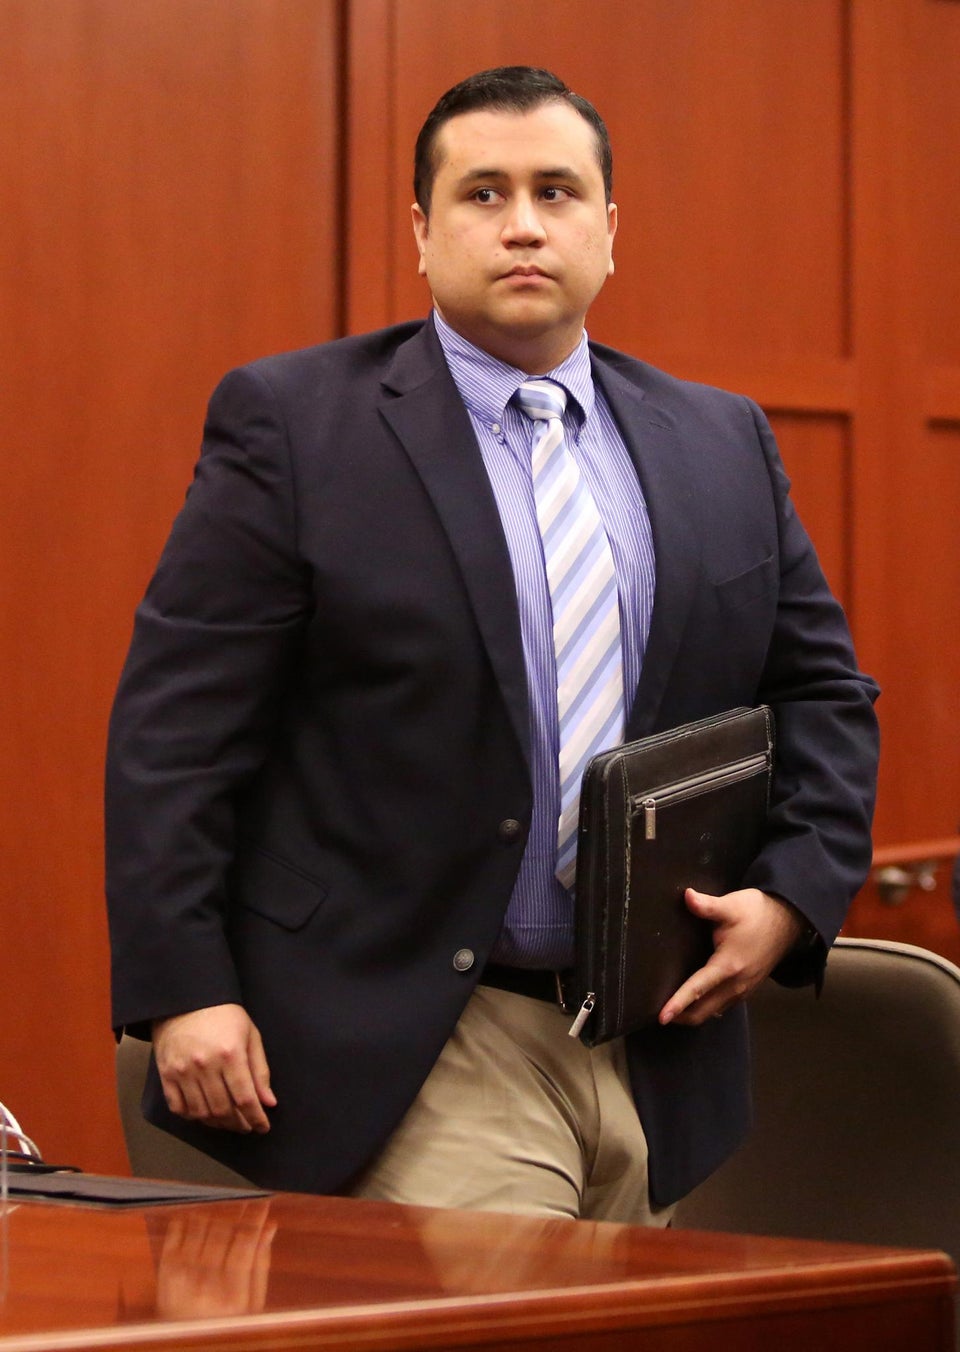 George Zimmerman Arrested on Charges of Domestic Abuse